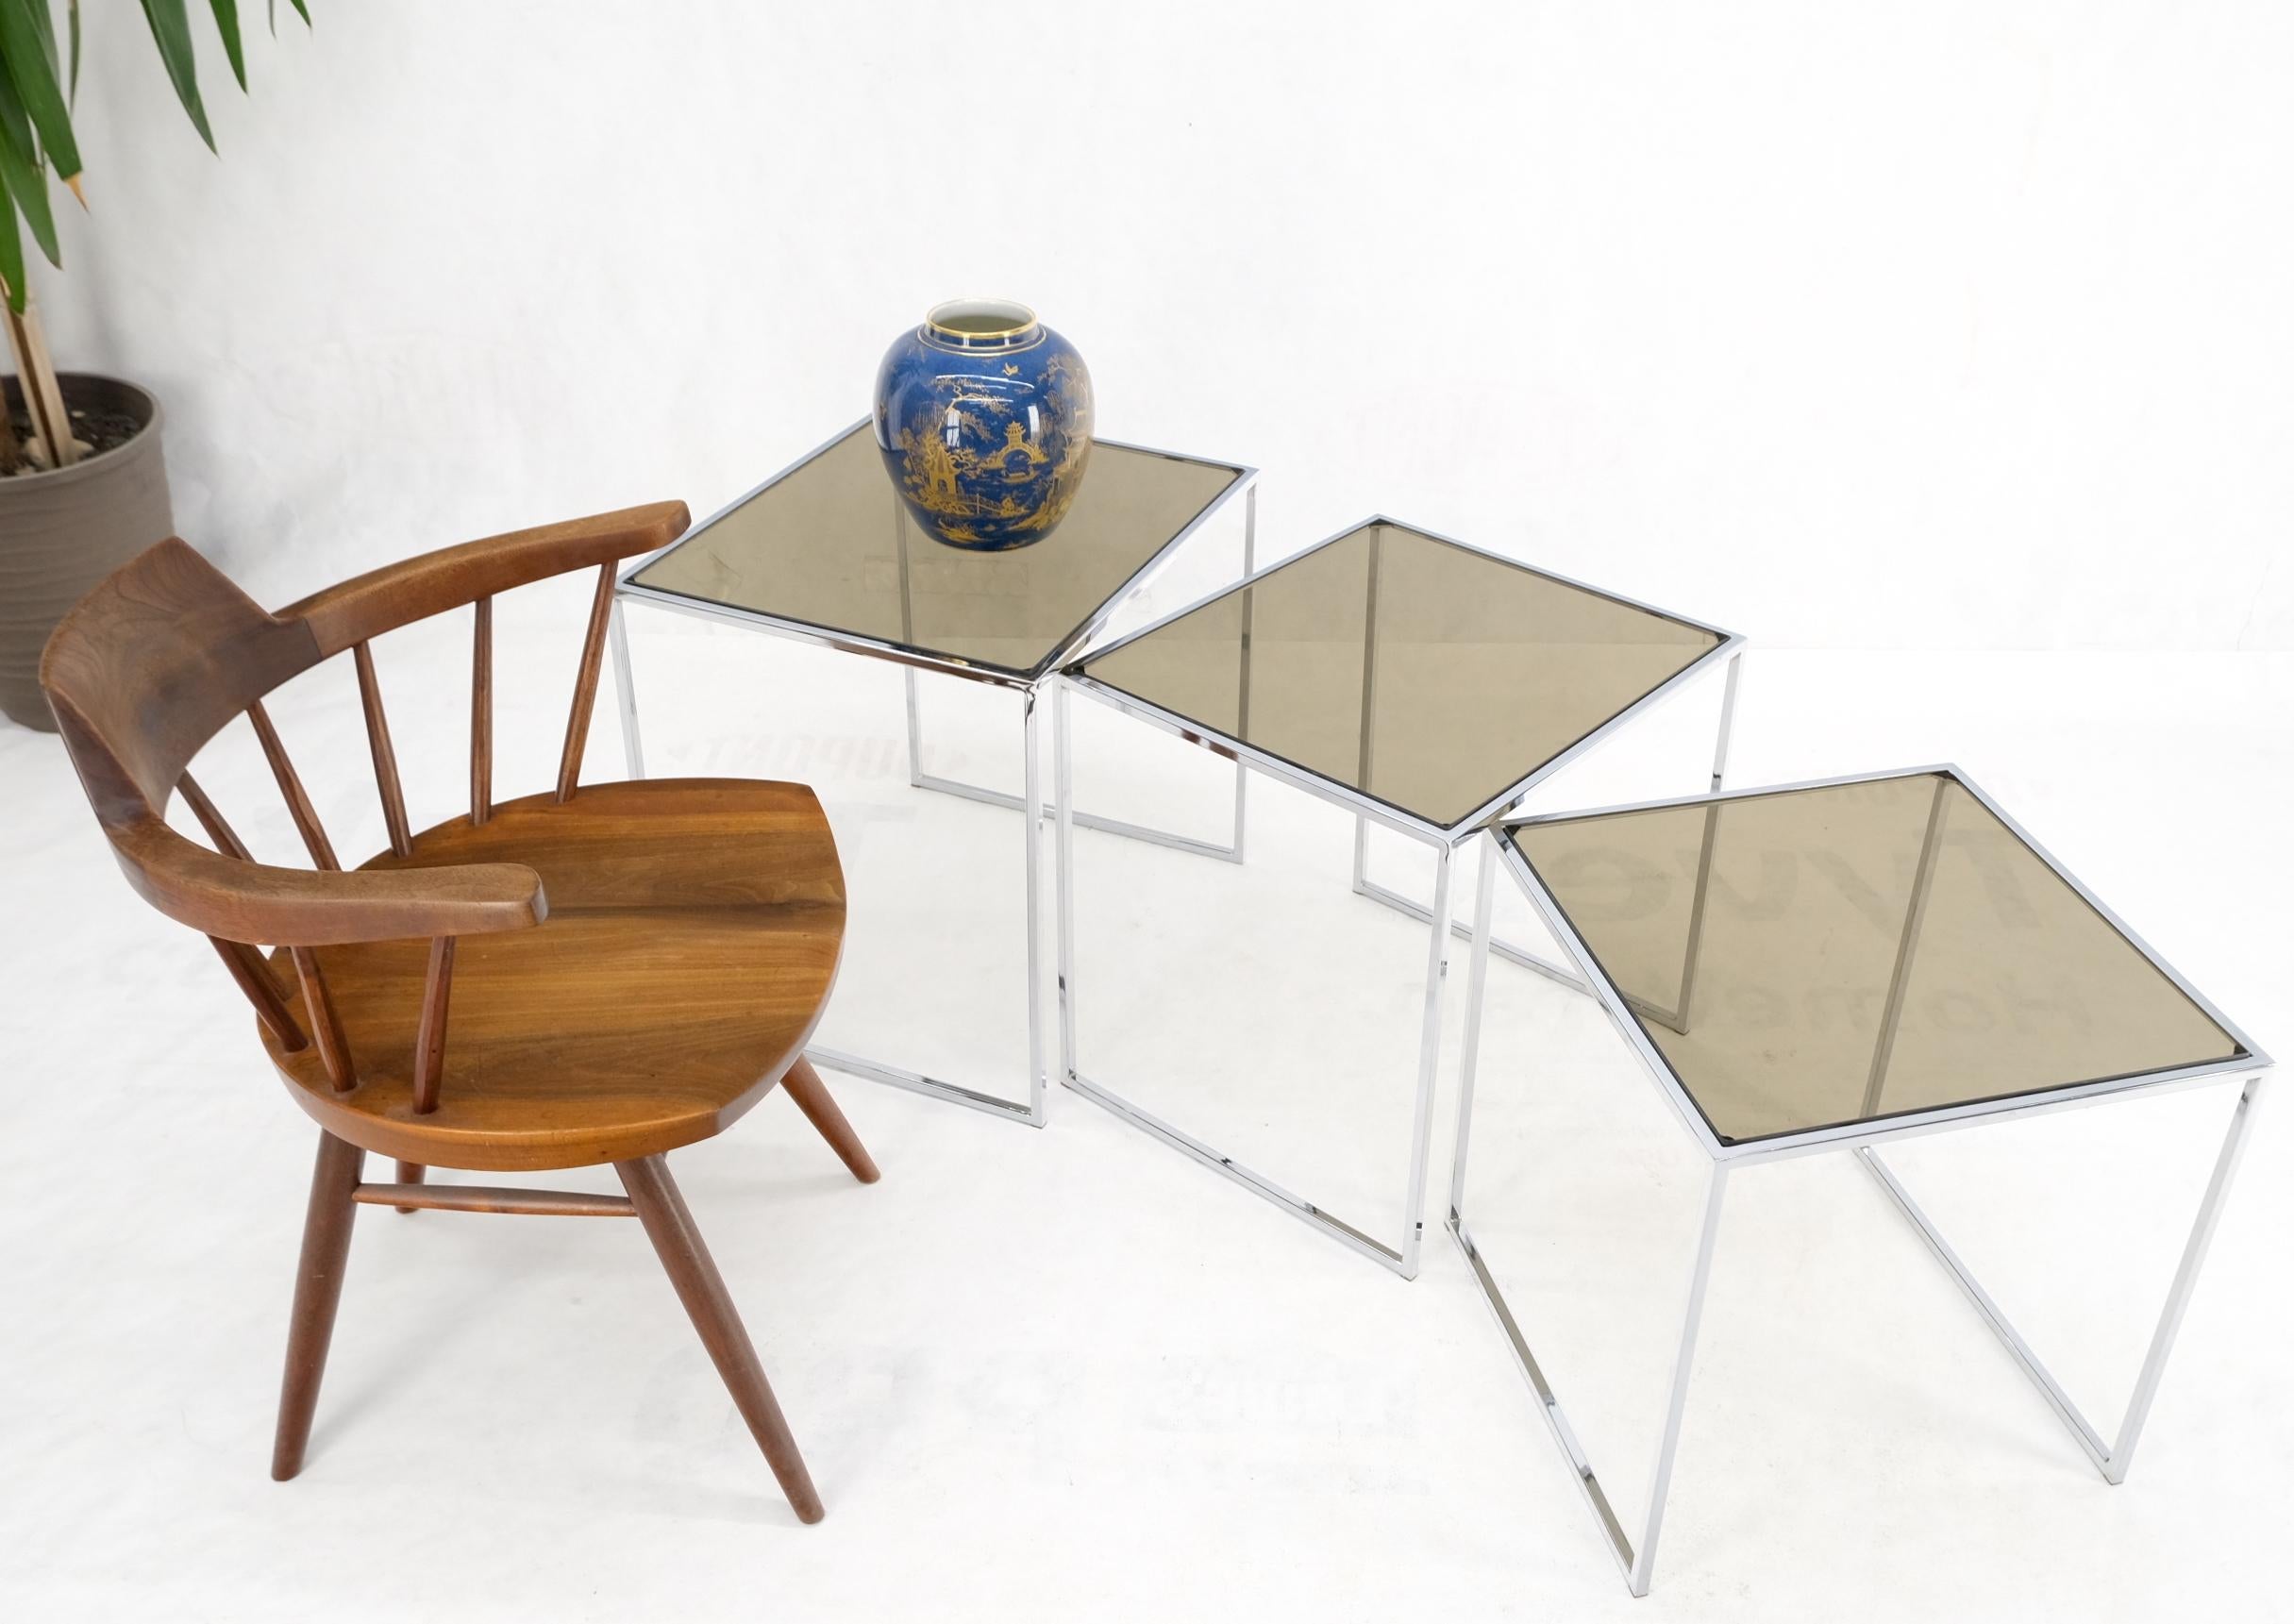 Set of wide rectangle shape chrome & smoked glass nesting end side tables.
Studio made set of Mid-Century Modern occasional tables from the 1970s.